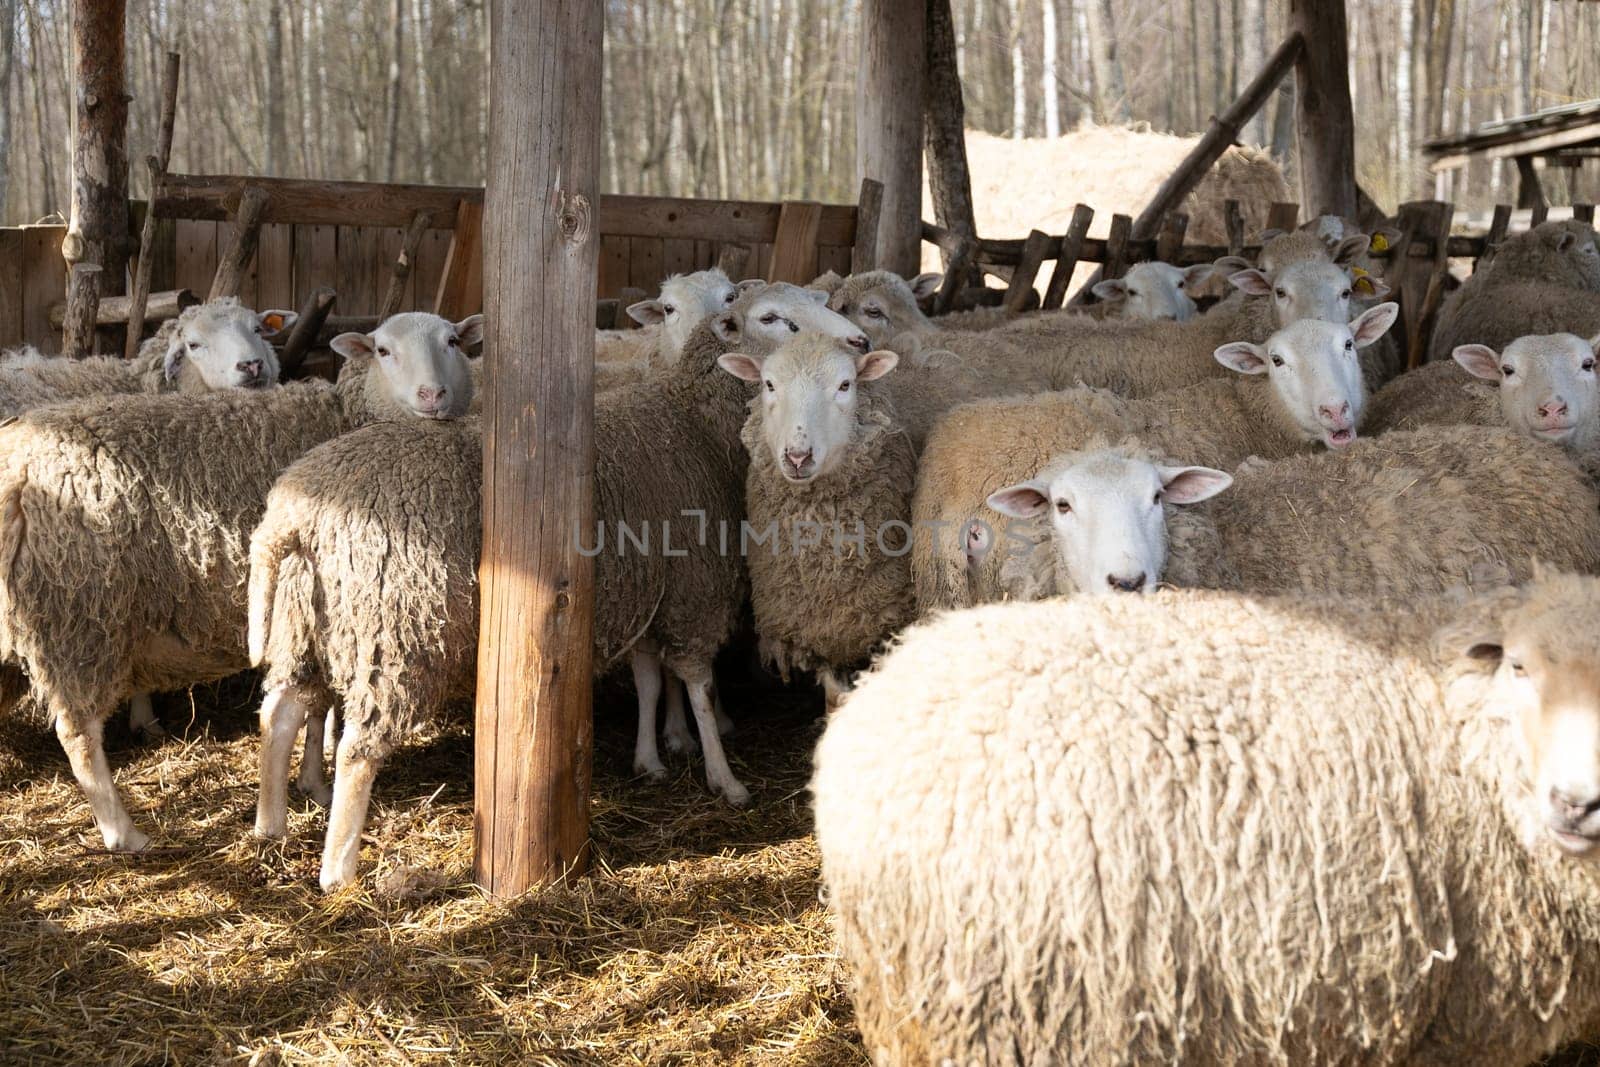 A group of sheep gathered closely together, standing side by side in a field. The sheep are calmly looking around, their woolly coats blending into a soft, white mass.